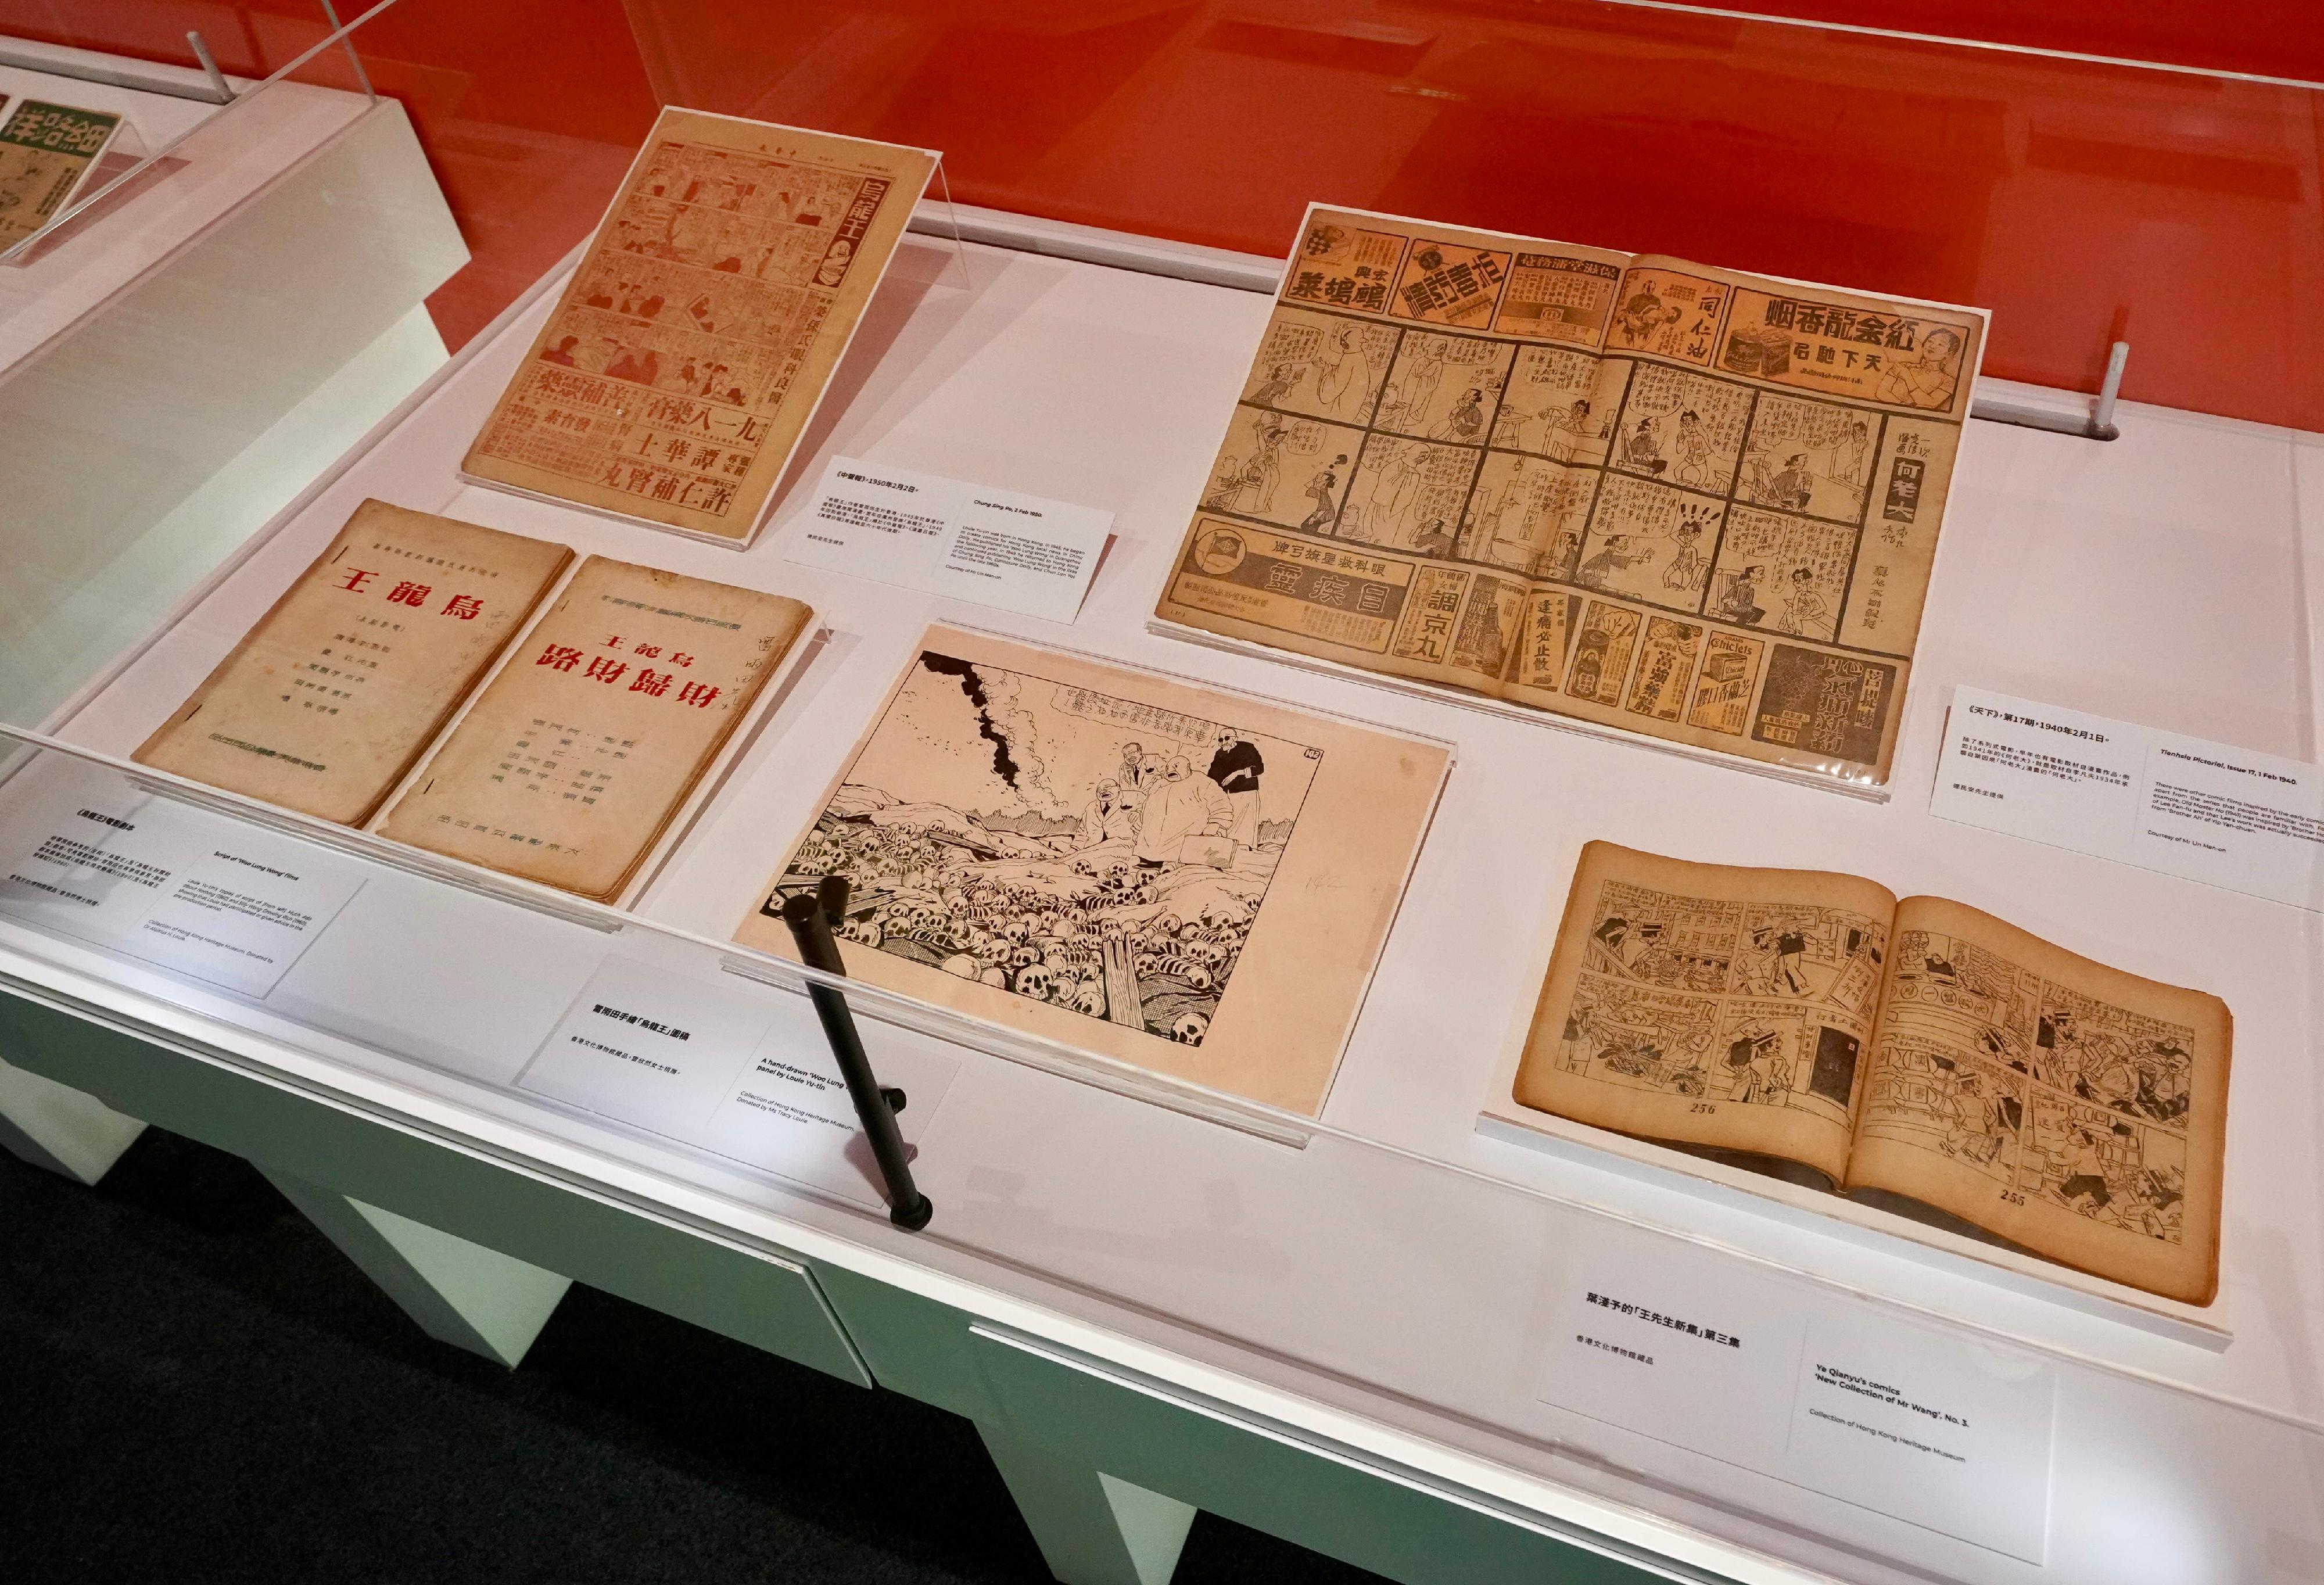 The exhibition "Tango Between Images - Hong Kong Films & Comics", organised by the Hong Kong Film Archive (HKFA) of the Leisure and Cultural Services Department, is being held from today (February 24) to October 8 at the Exhibition Hall of the HKFA. Photo shows the Chinese comic works and scripts of film adaptations.